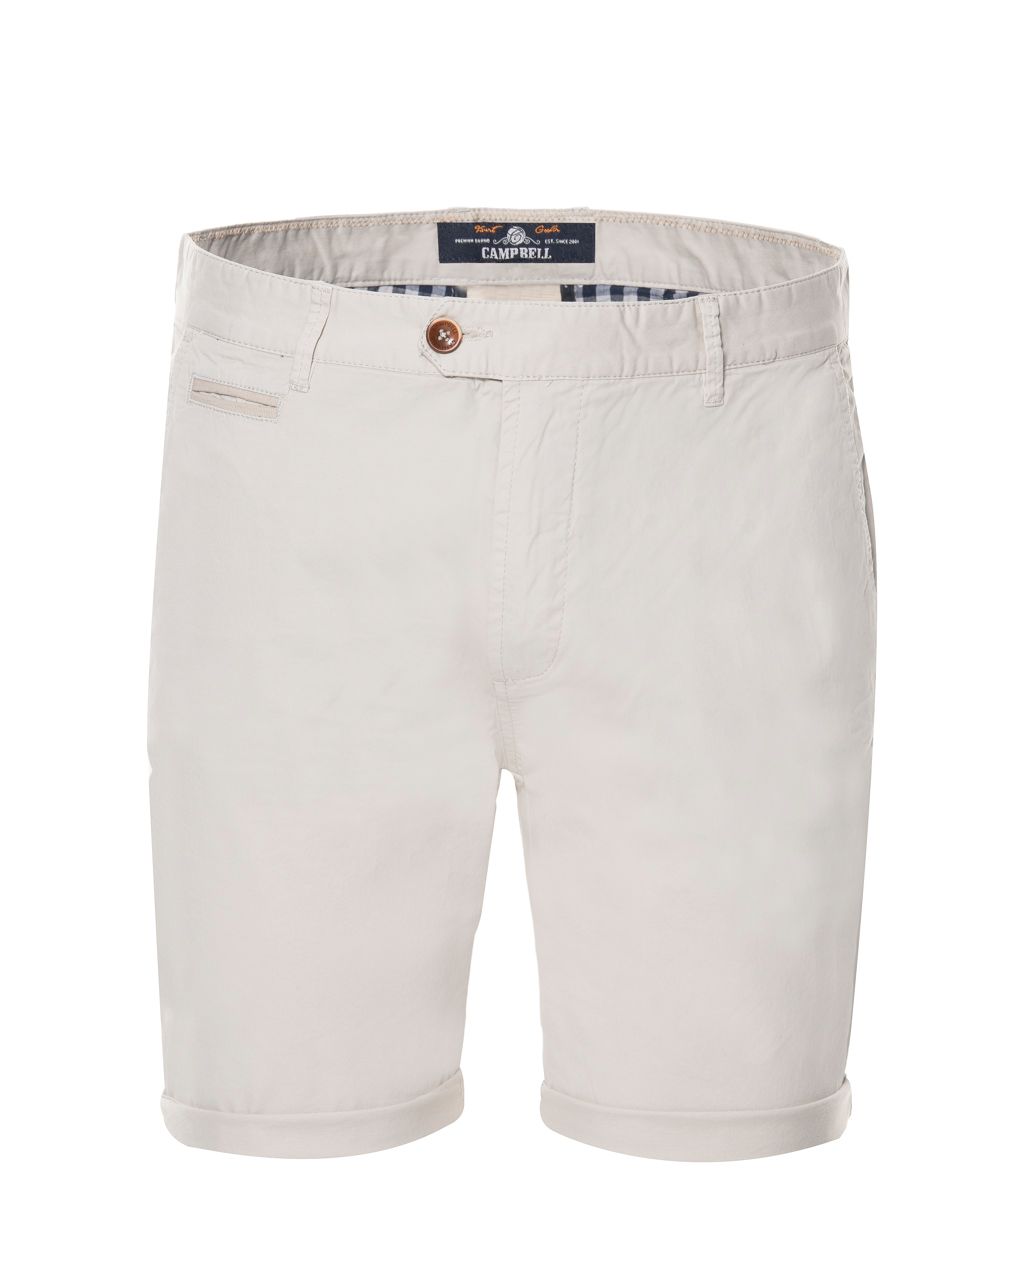 Campbell Classic Swansea Short Off White uni 053813-002-31